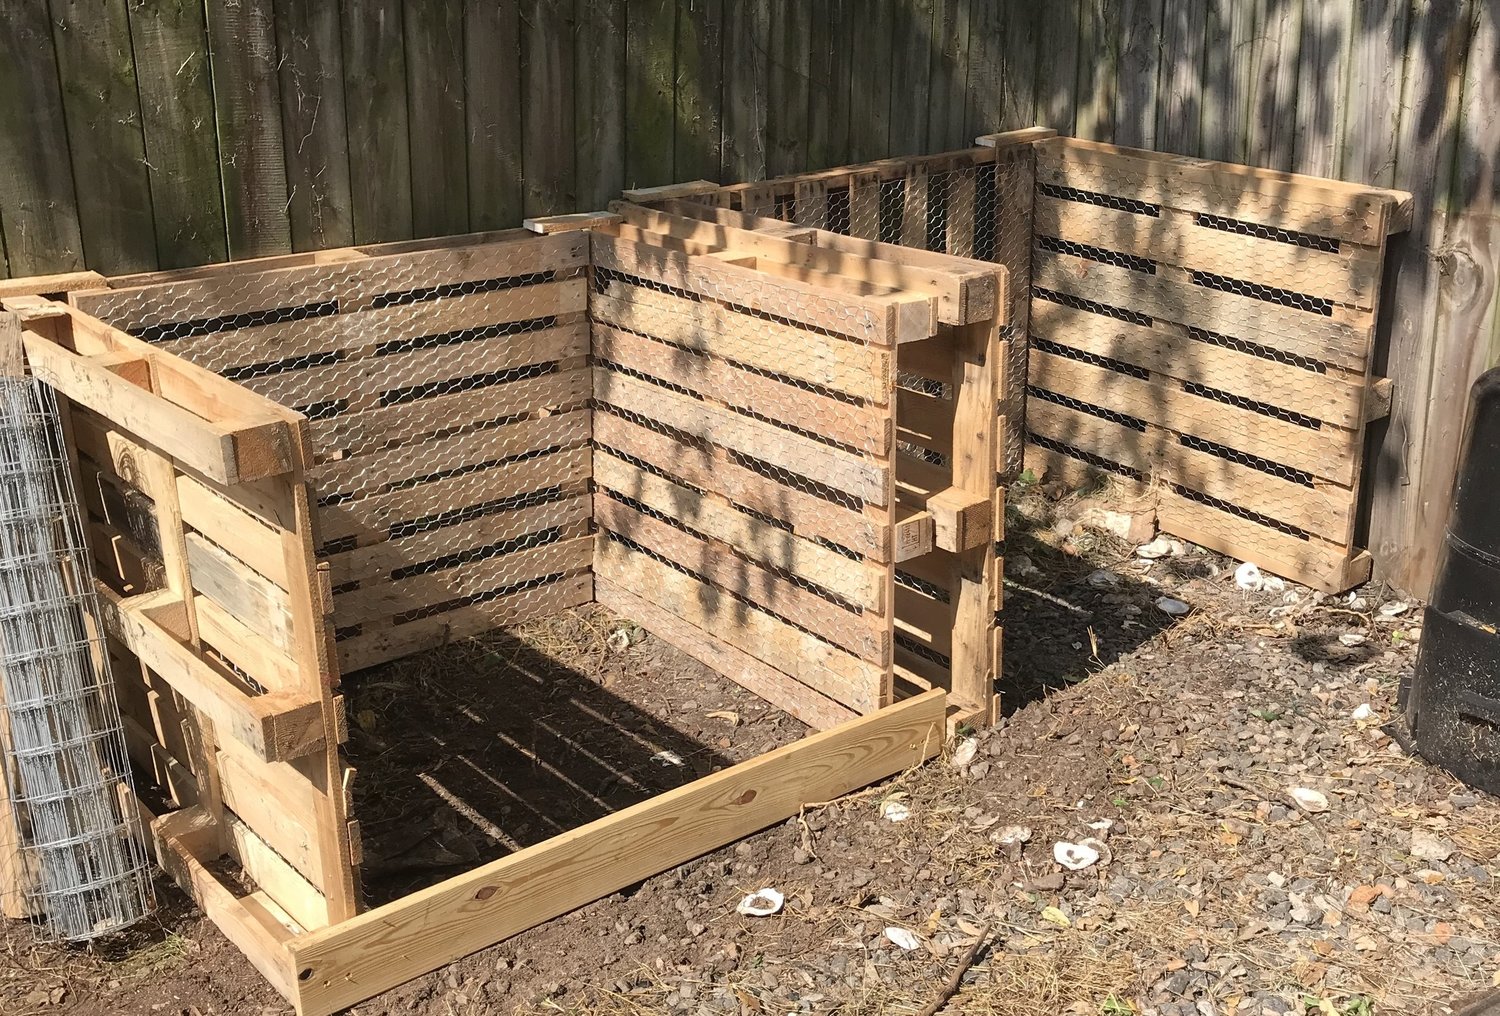 How To Make A Compost Bin From Pallets